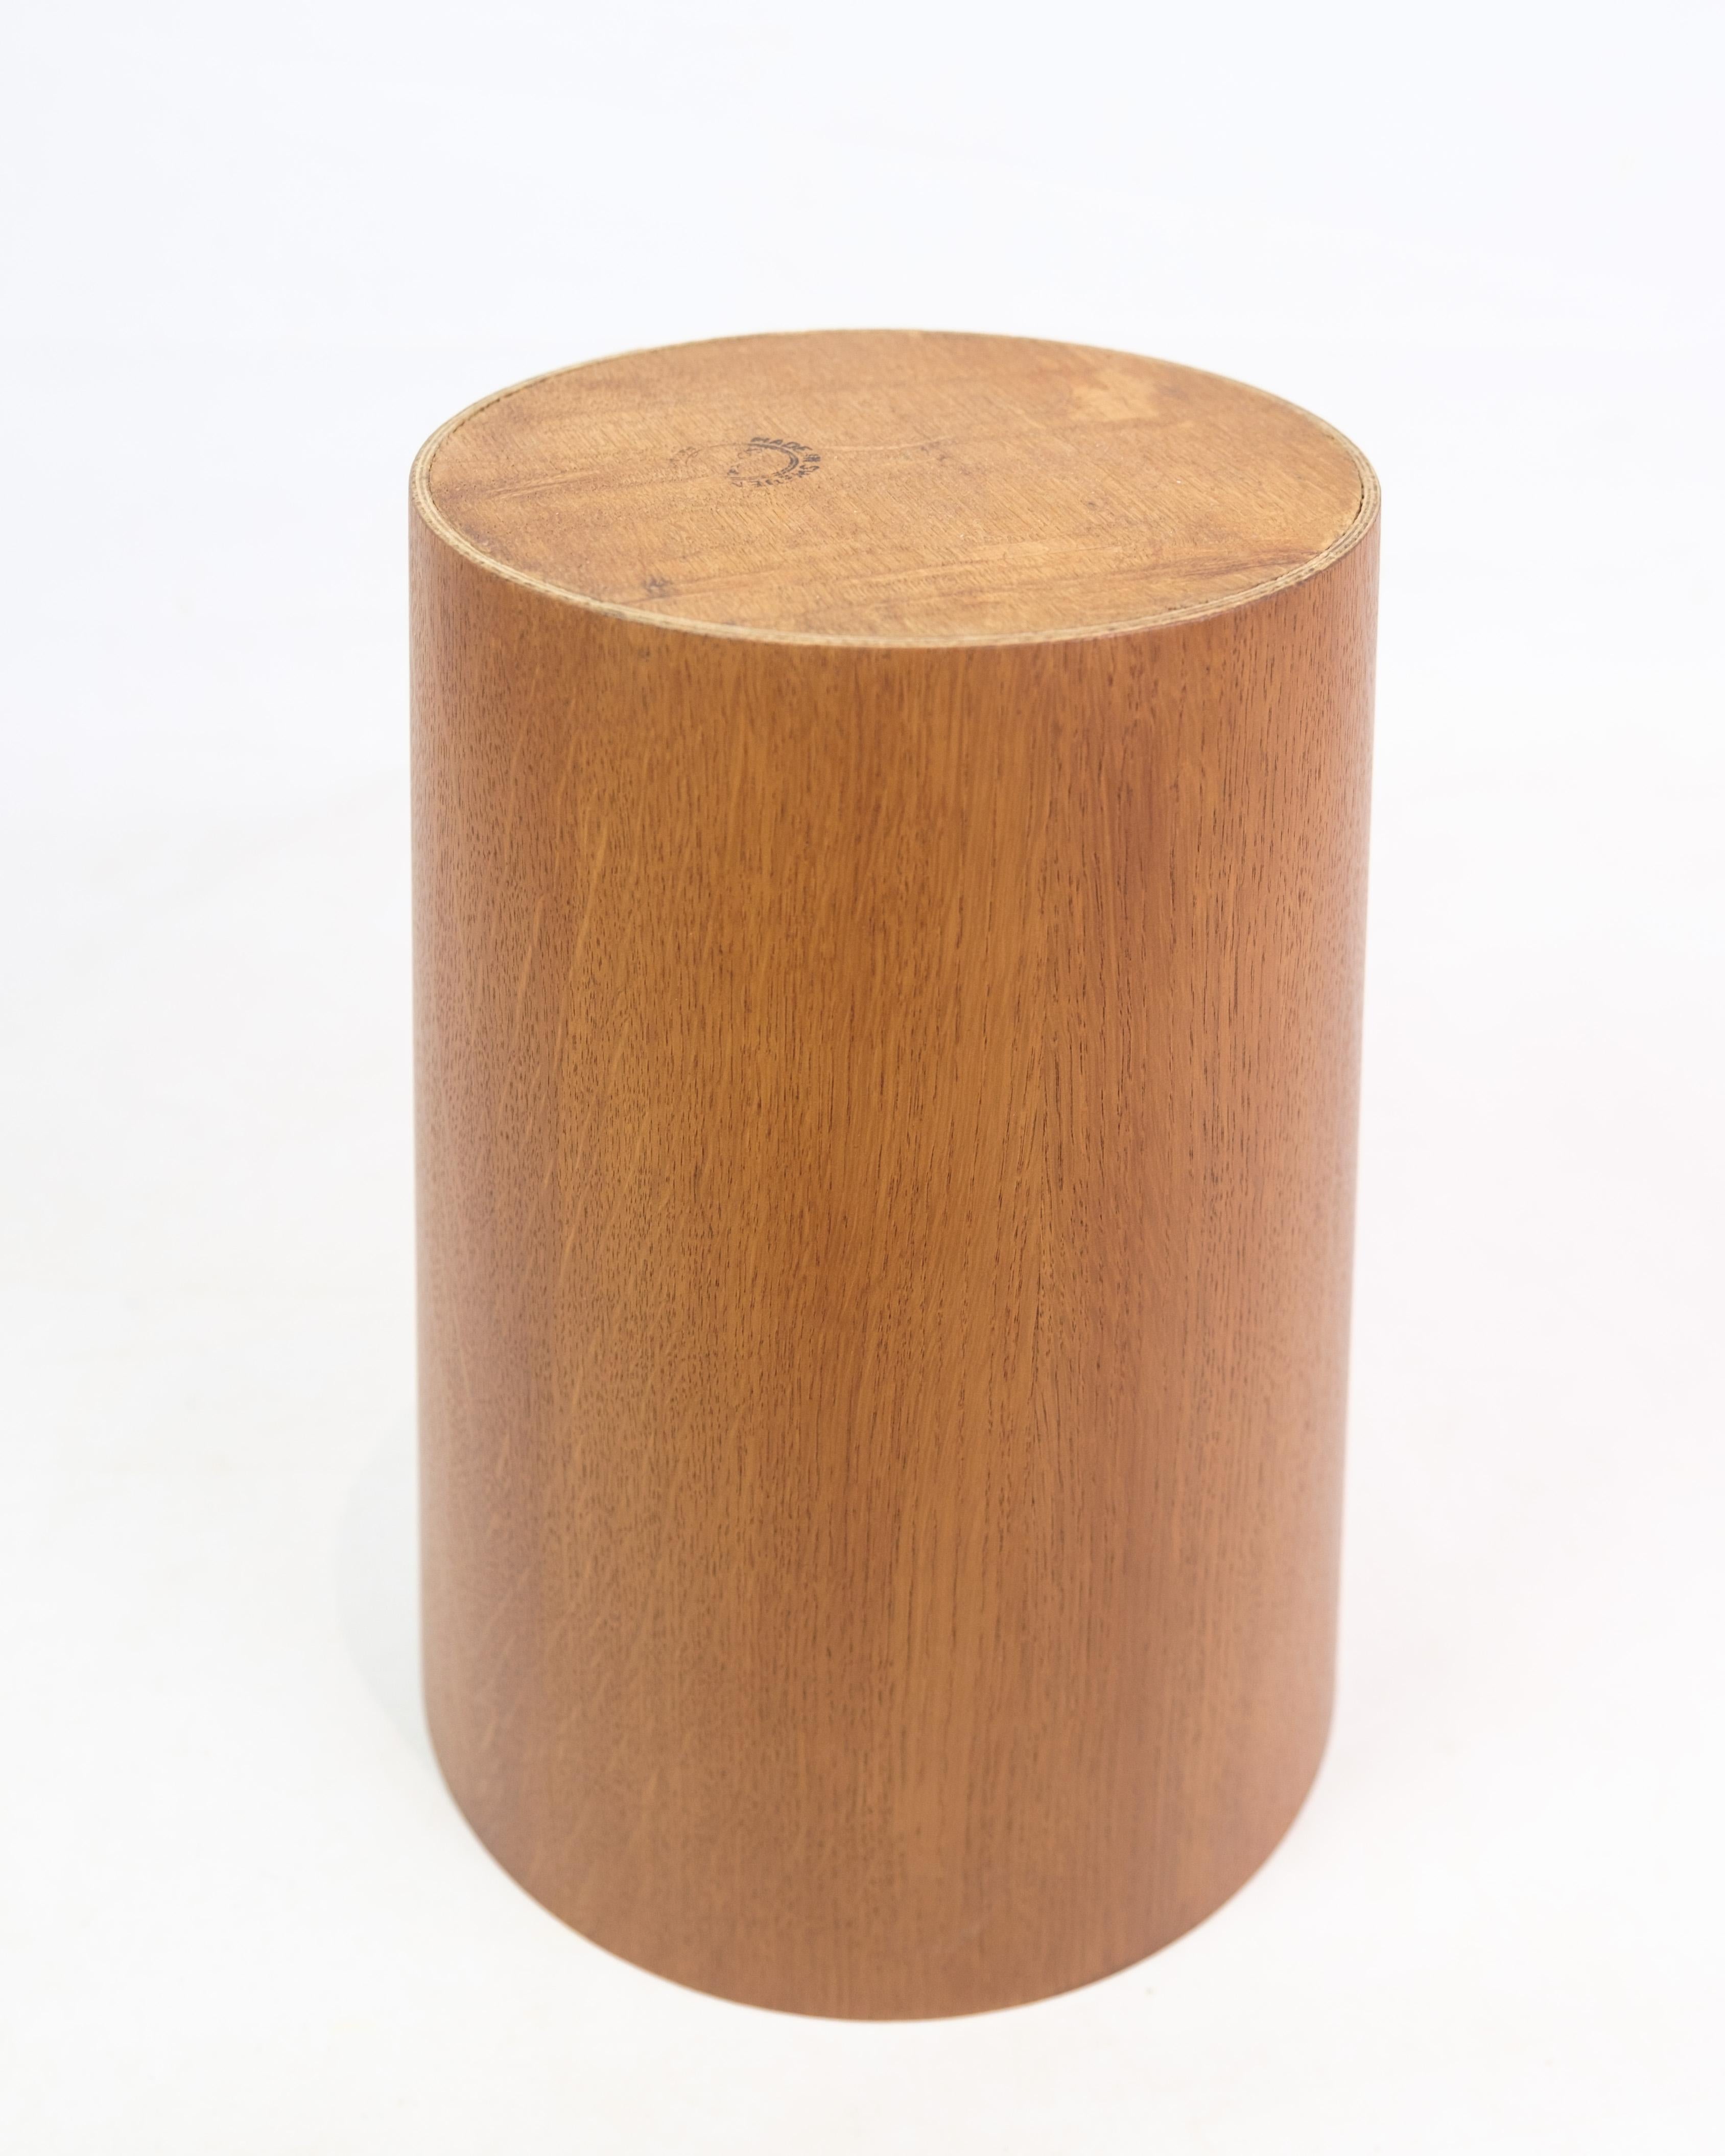 Mid-20th Century   Paper basket In Teakwood, Designed By Servex, Made in Sweden From 1960s For Sale